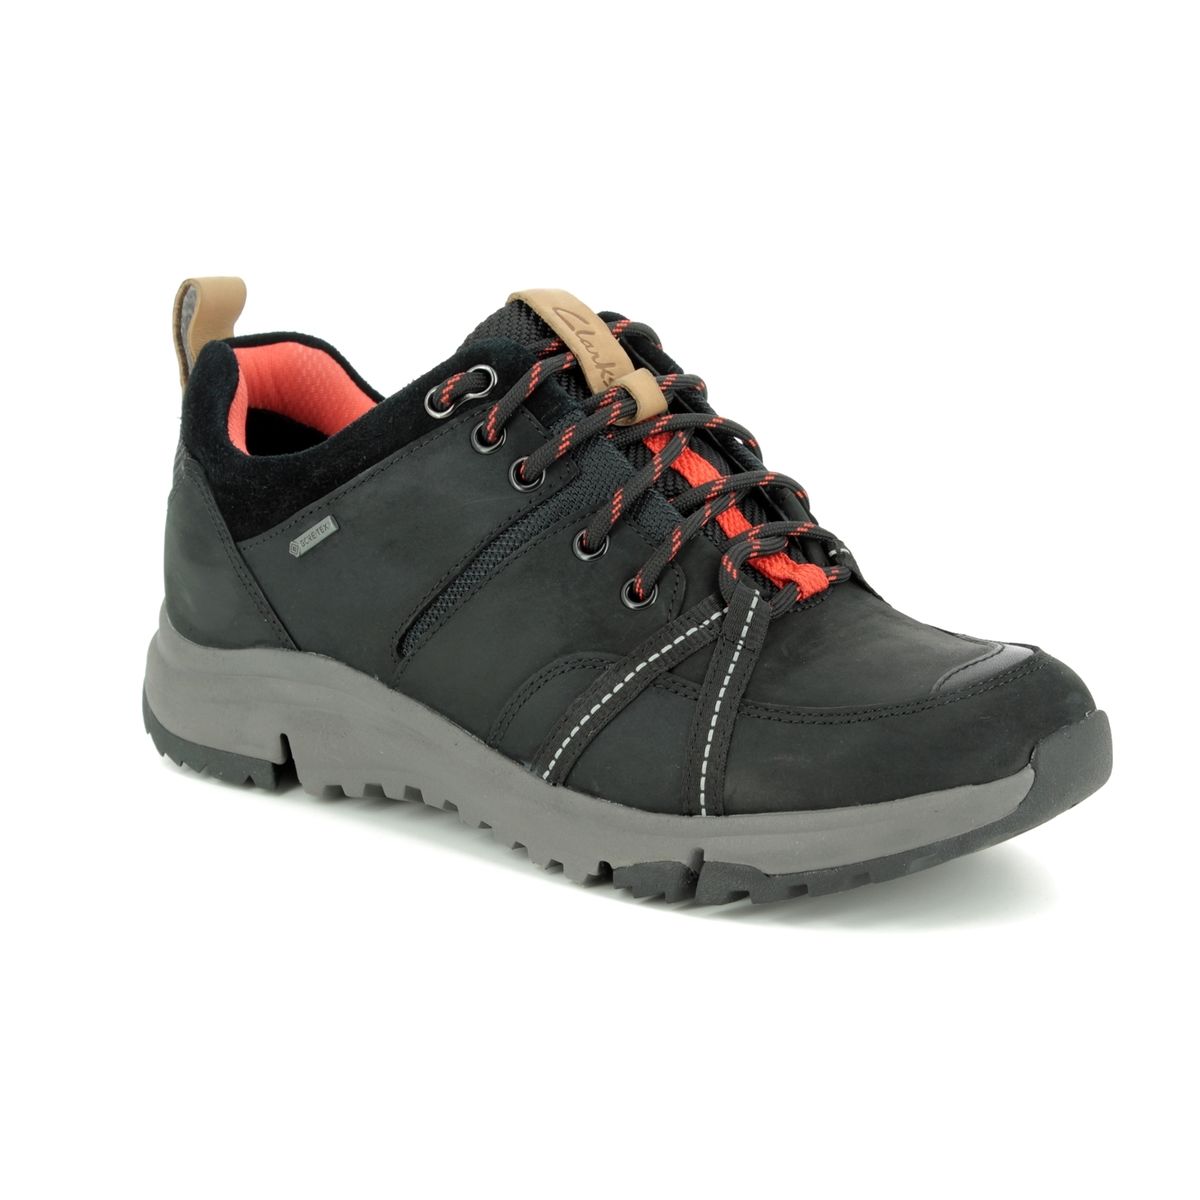 clarks gore tex shoes womens